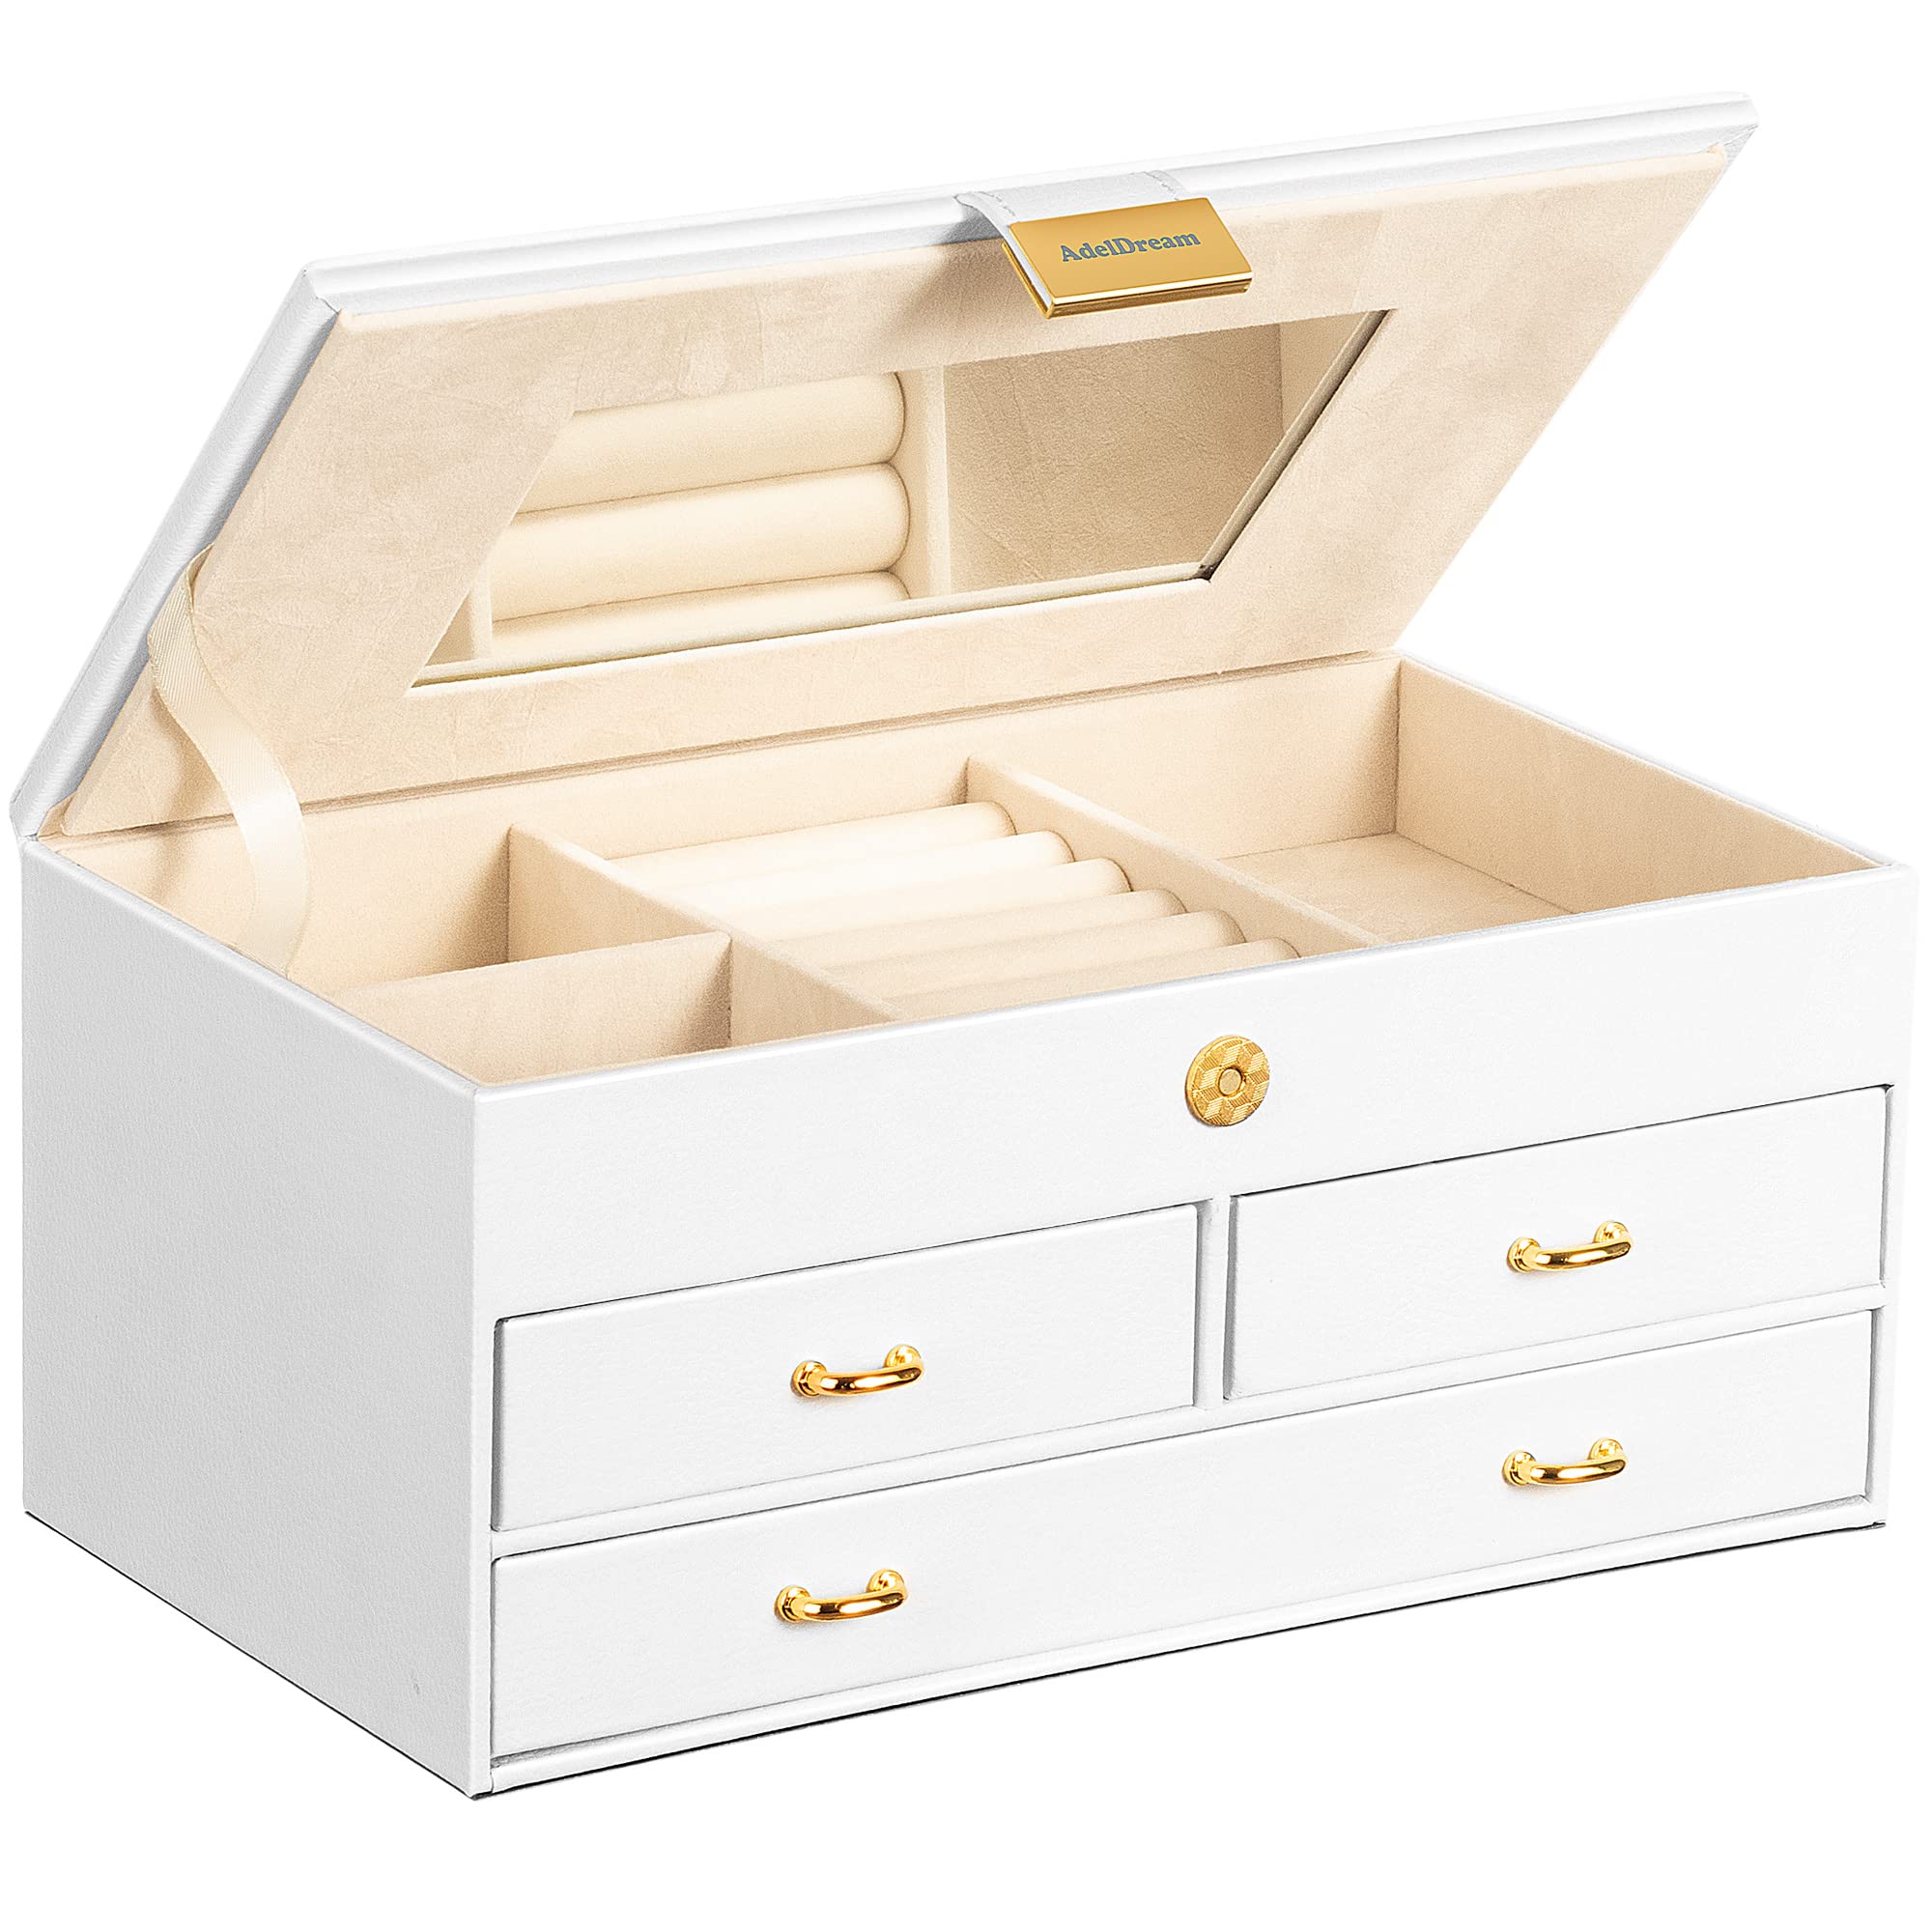 ADEL DREAM Jewellery Box Jewellery Box with 2 Drawers, Lockable Jewellery Organiser with Mirror, Removable Travel Box for Rings, Bracelets, Earrings, Velvet Lining (J11-3White)